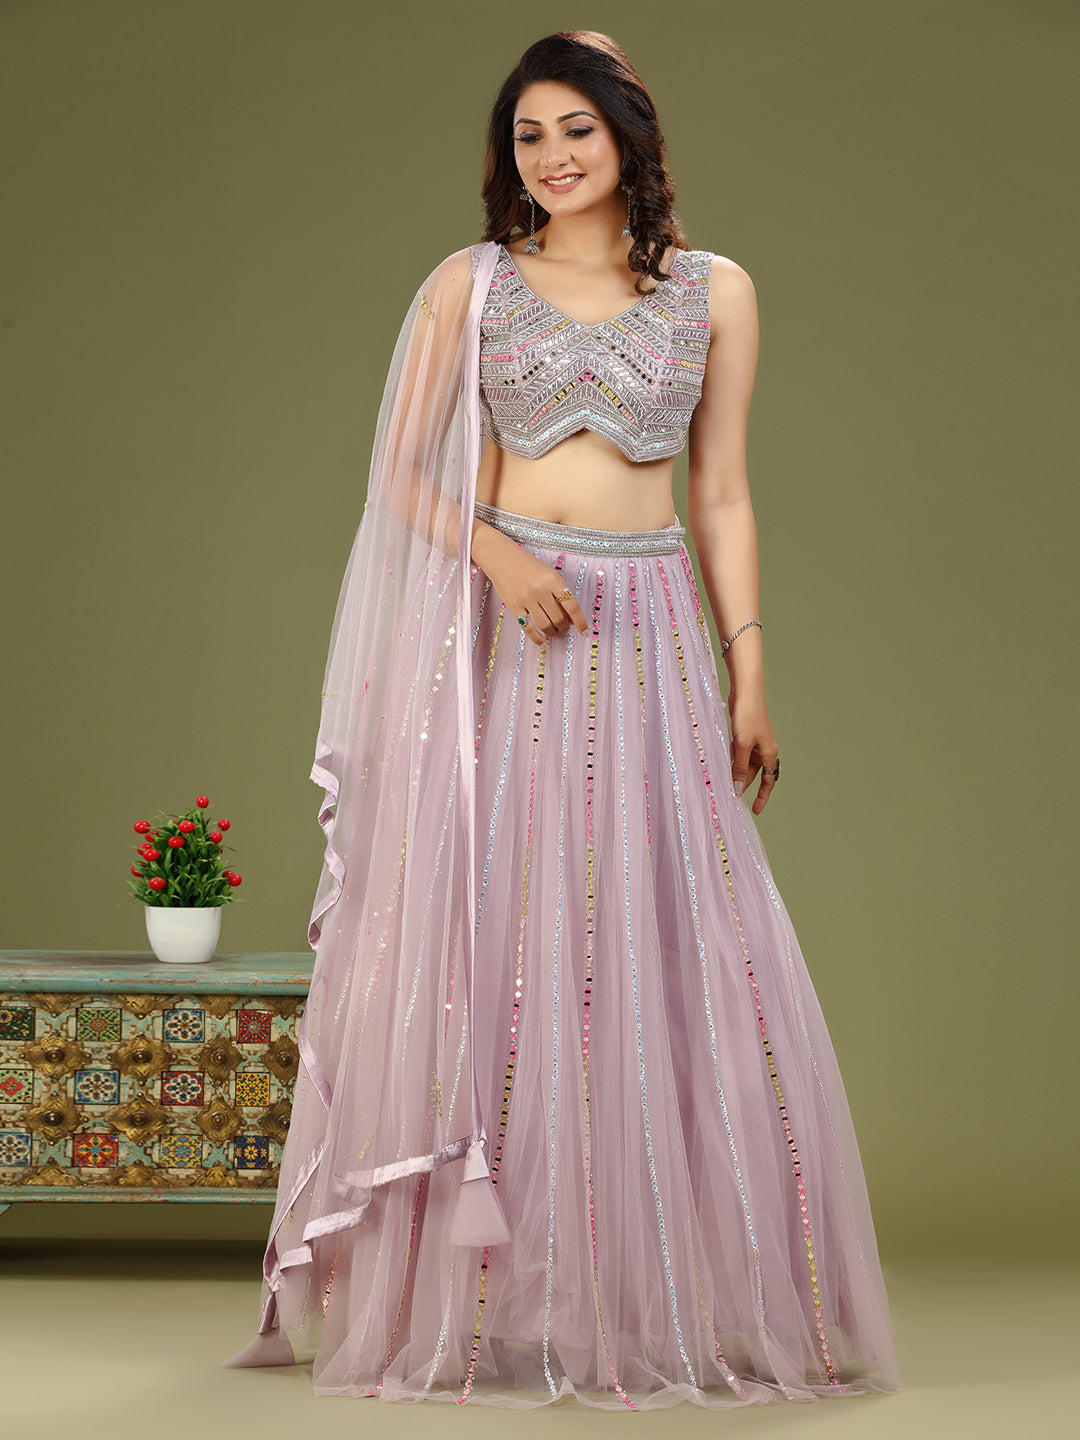 Tips to Choose the Right Lehenga Choli as Per Your Body Type - Issuu